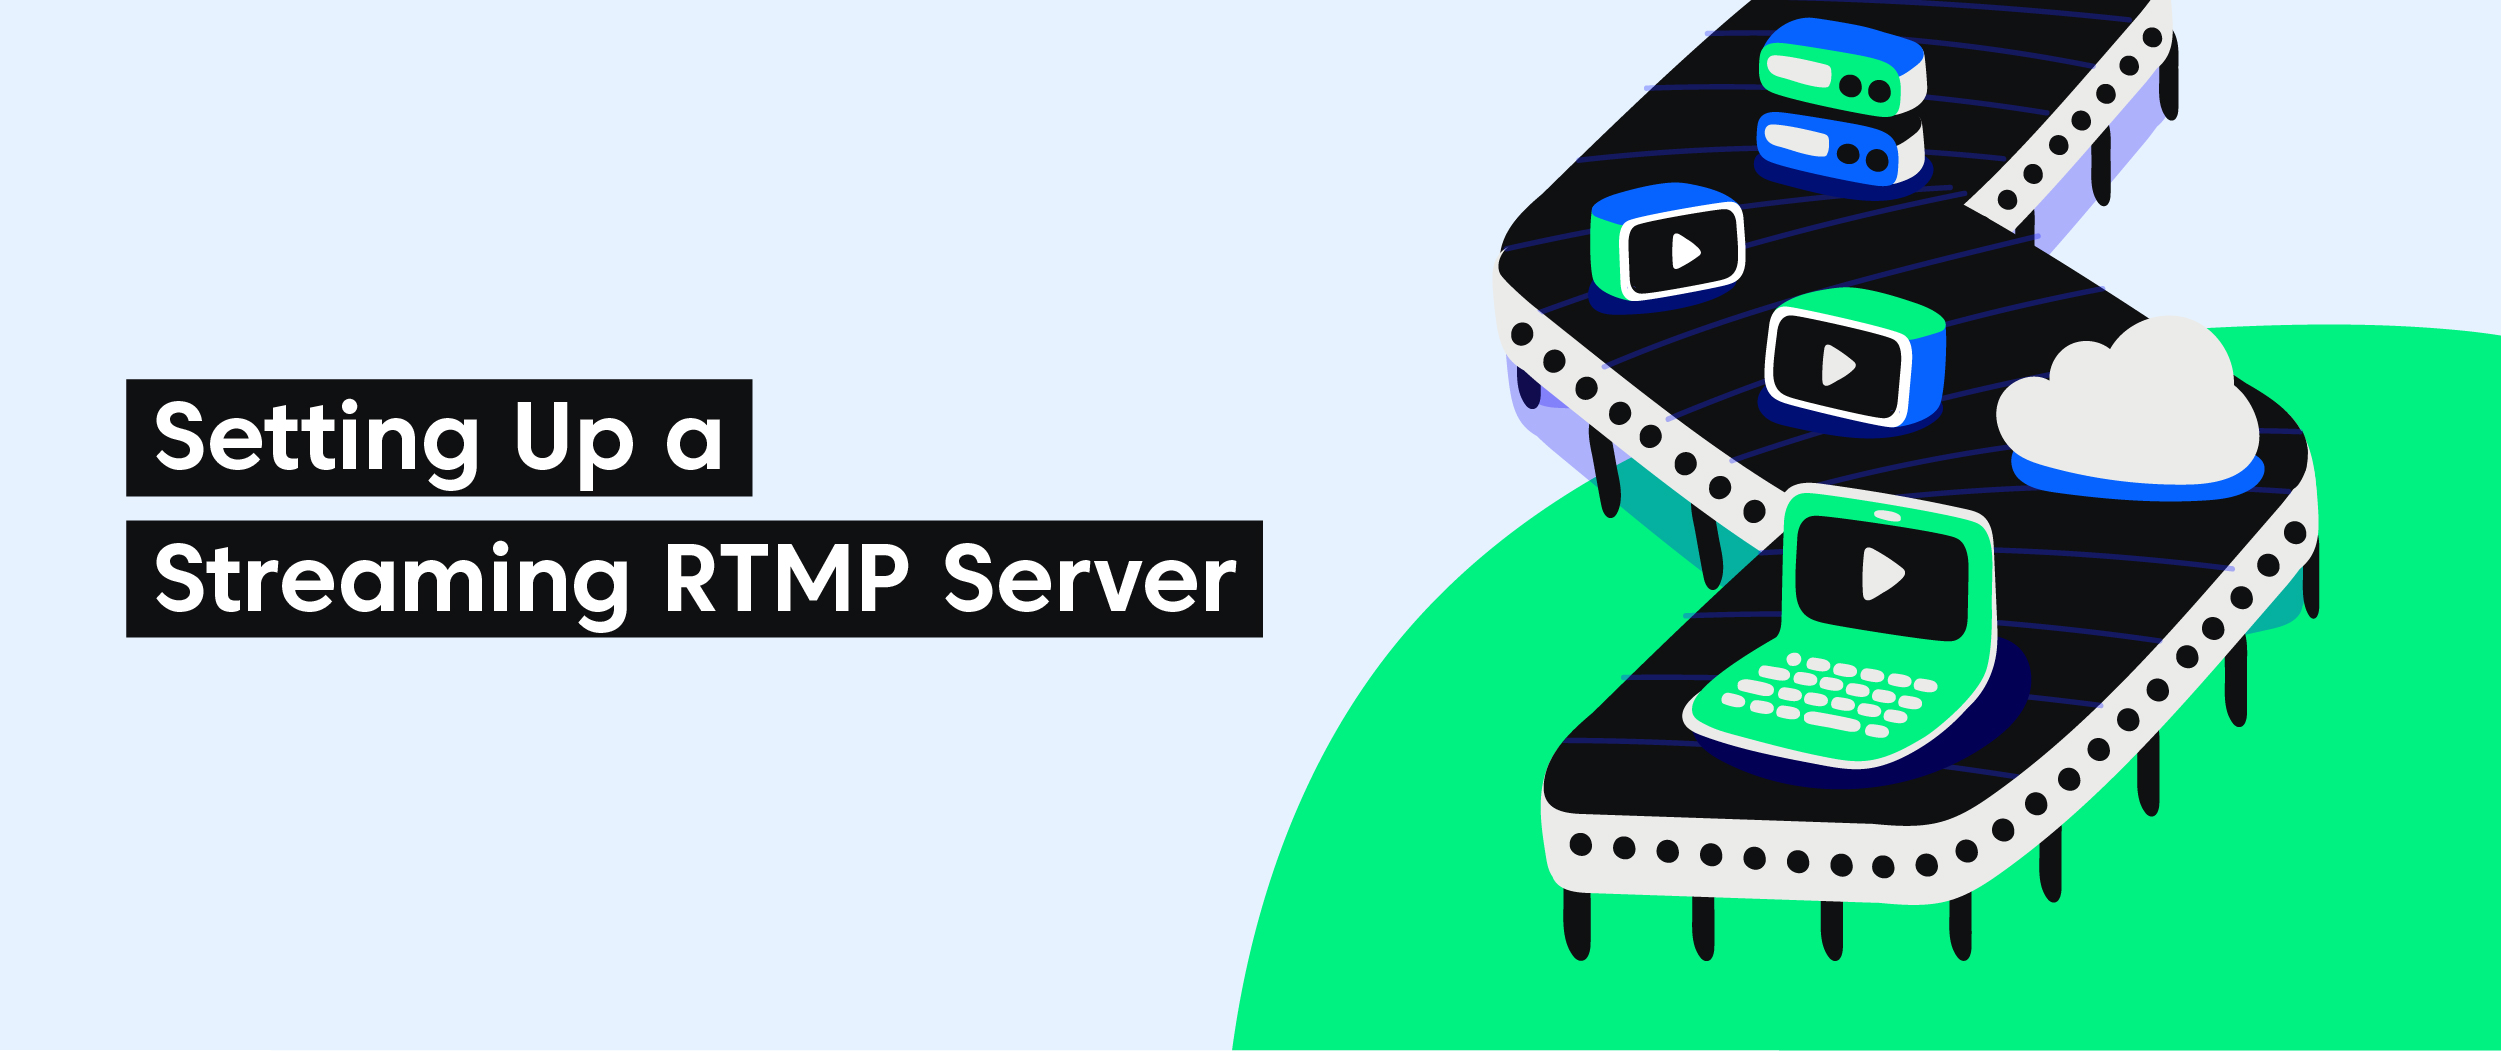 Setting Up a Streaming RTMP Server